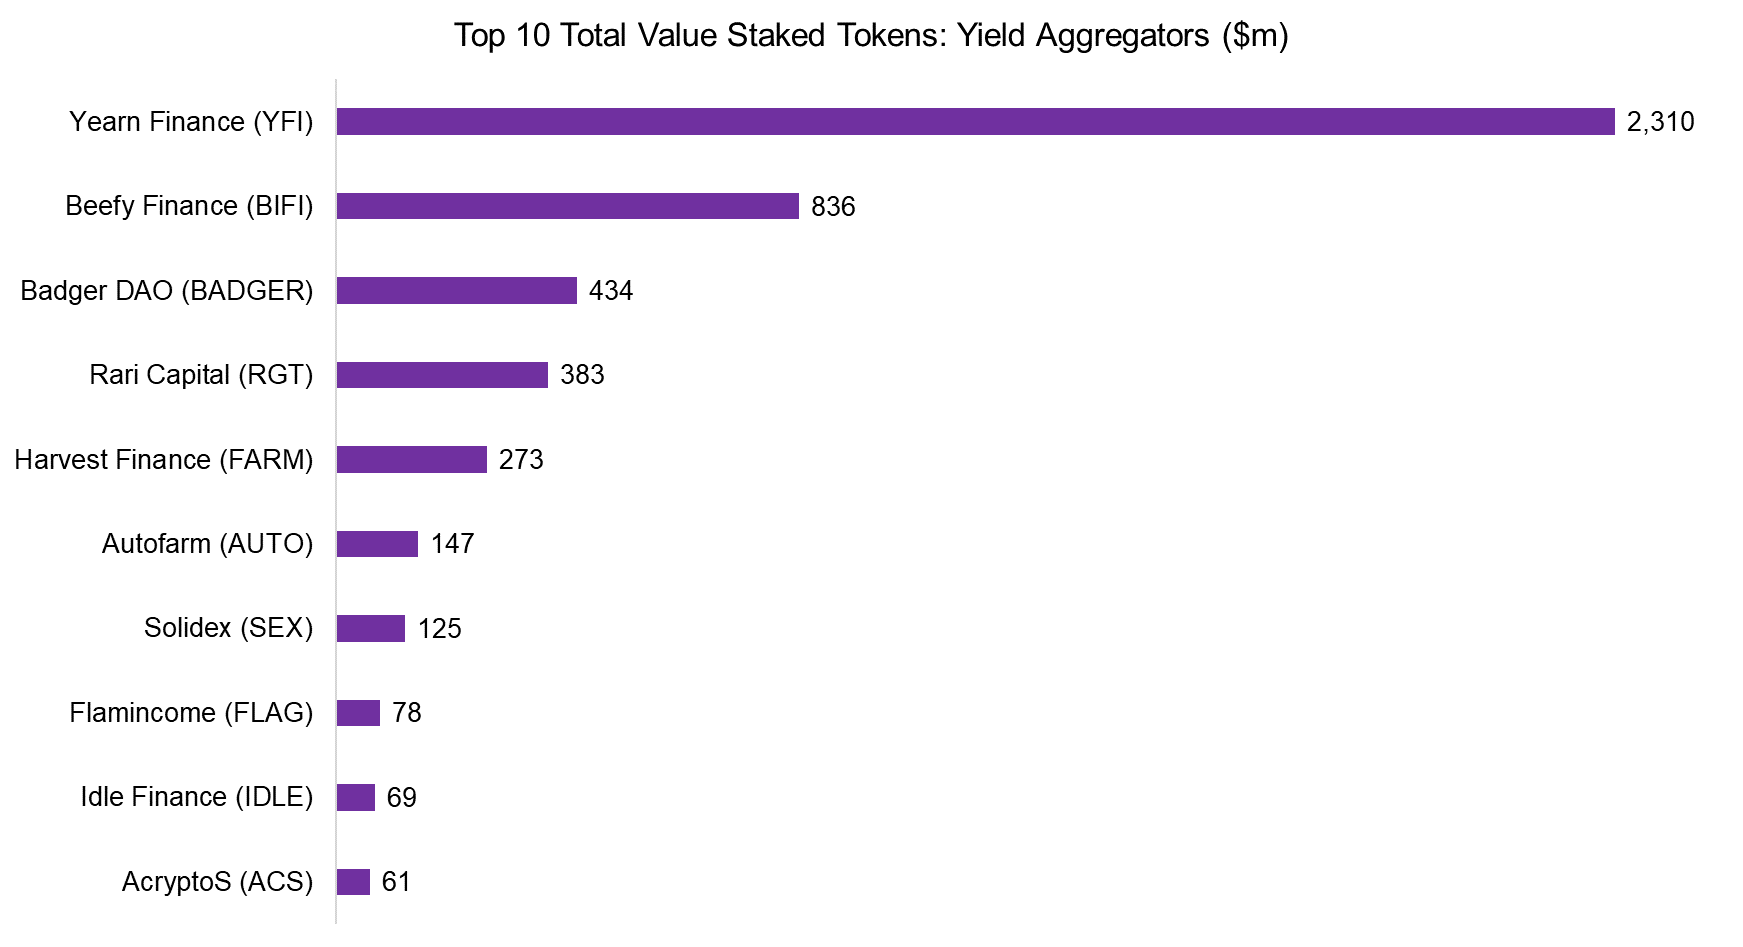 Top 10 Total Value Staked Tokens: Yield Aggregators ($m)